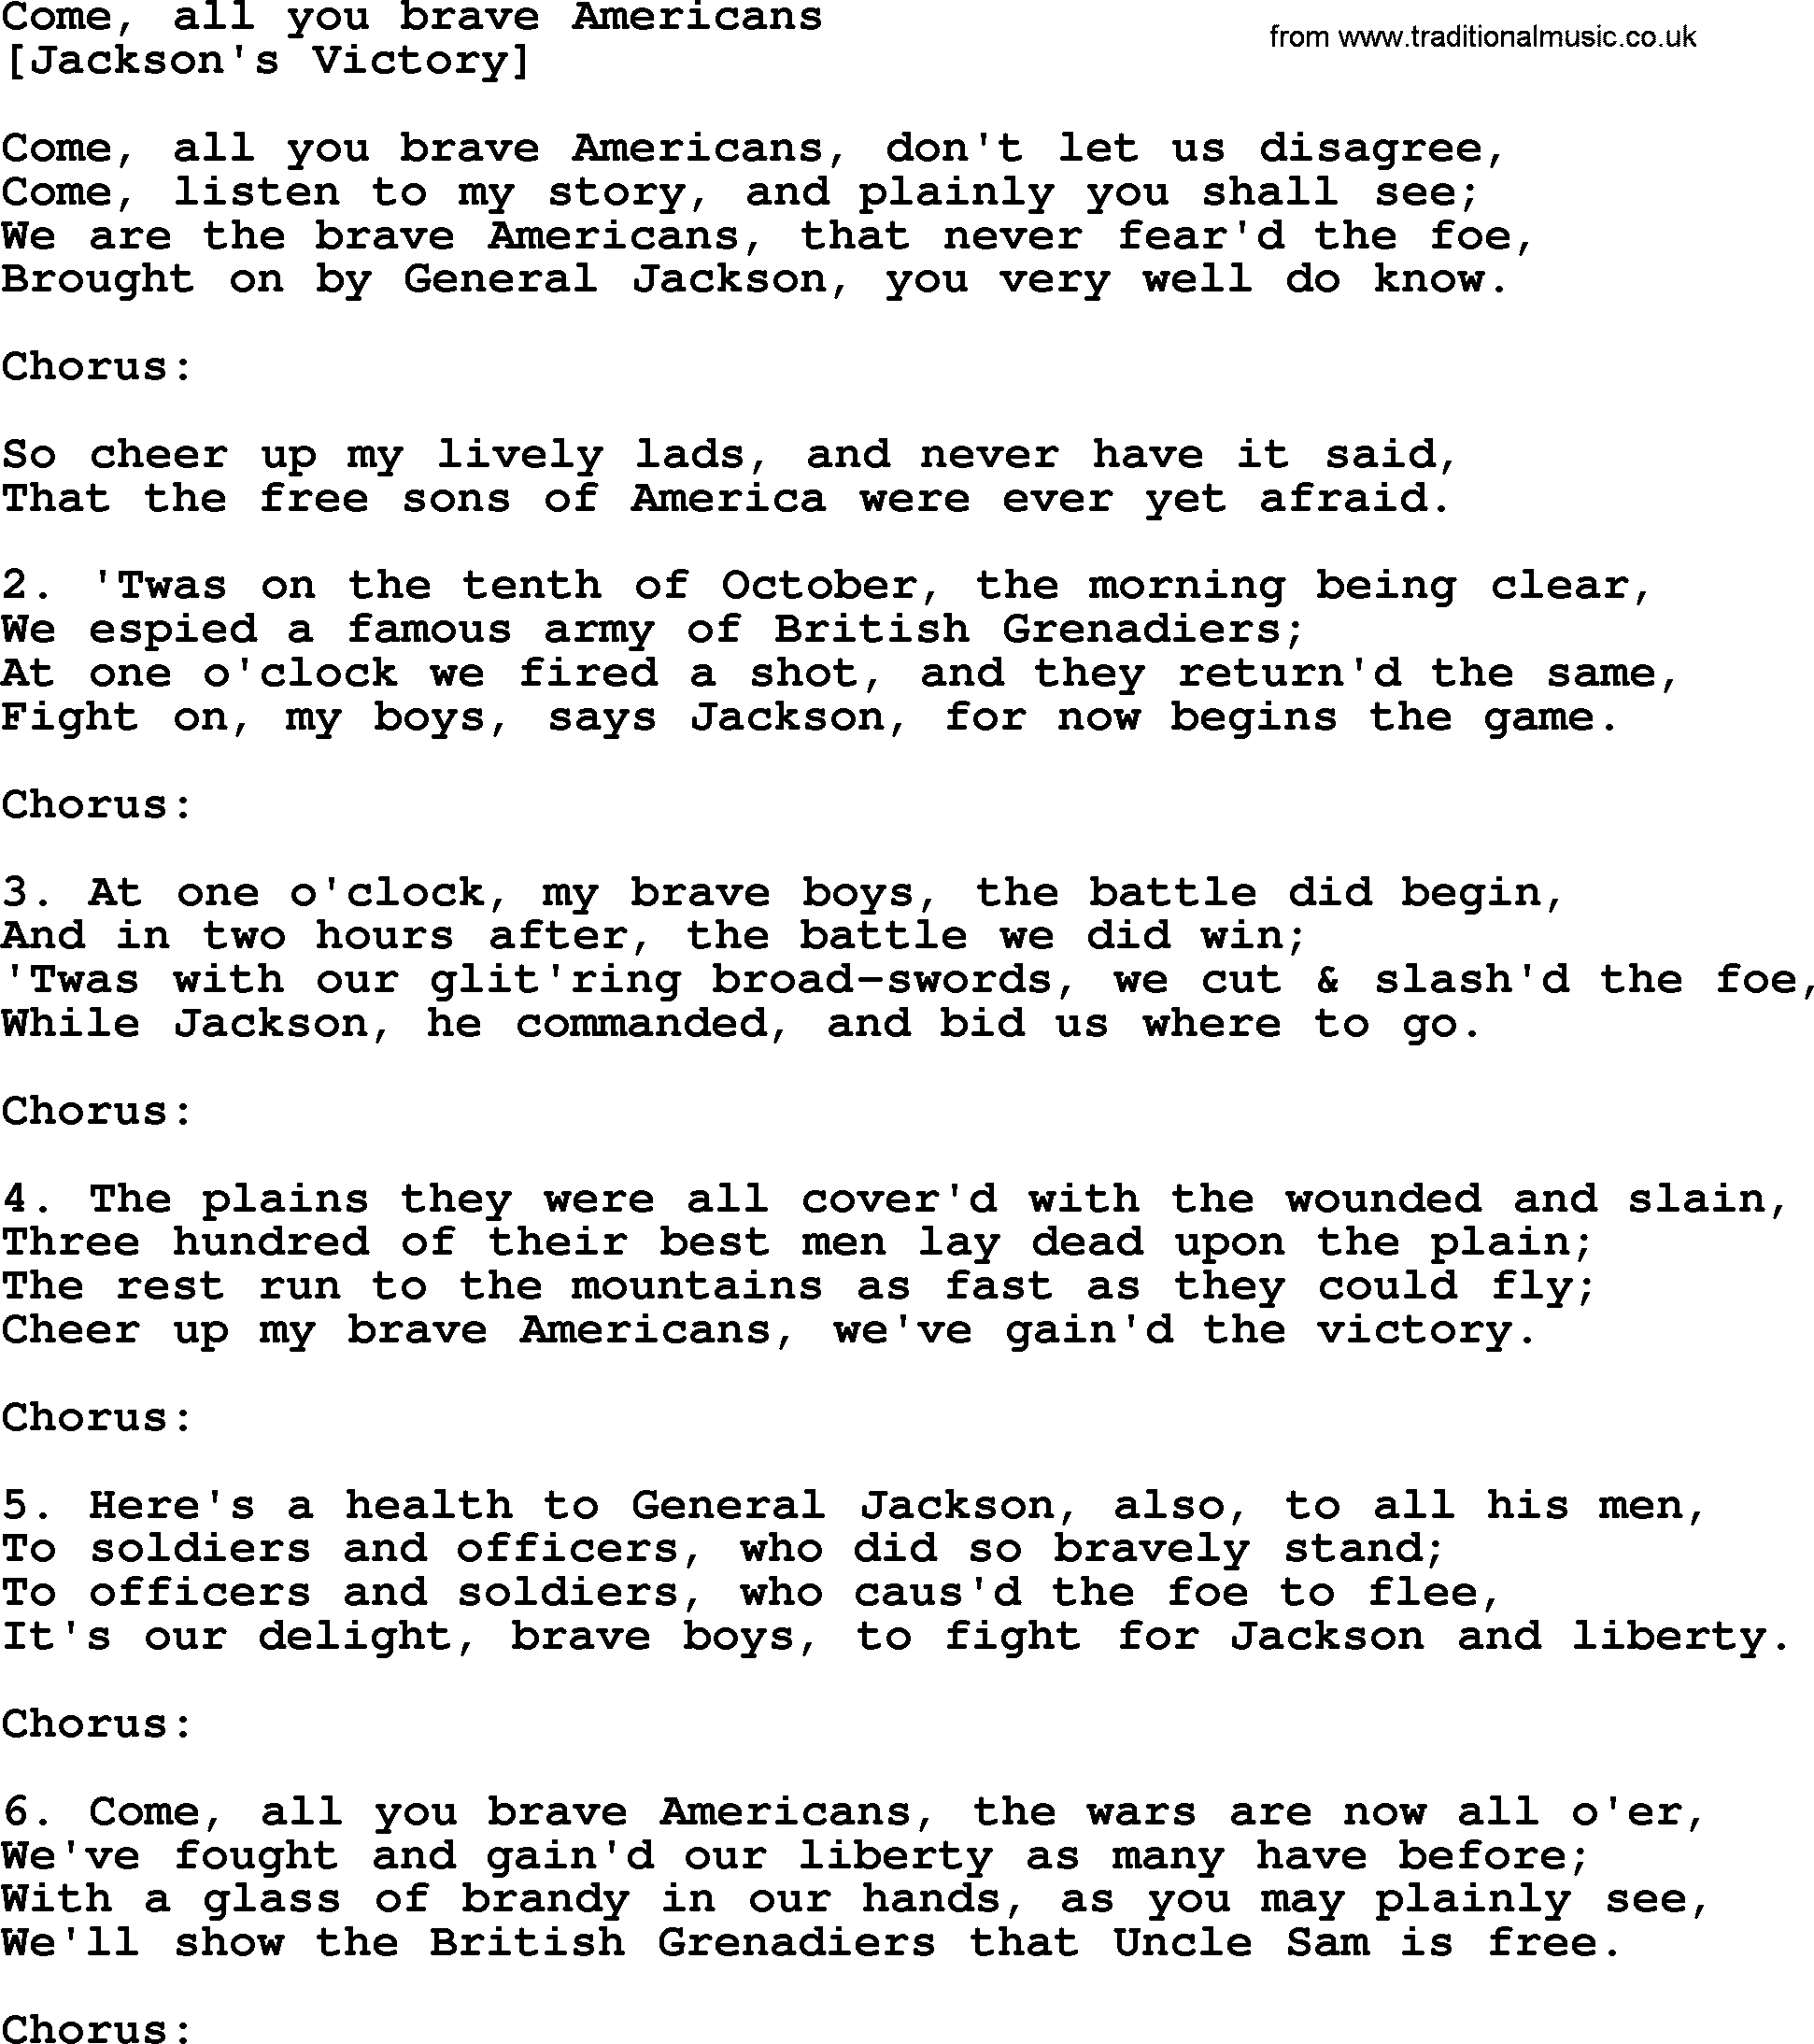 Old American Song: Come, All You Brave Americans, lyrics